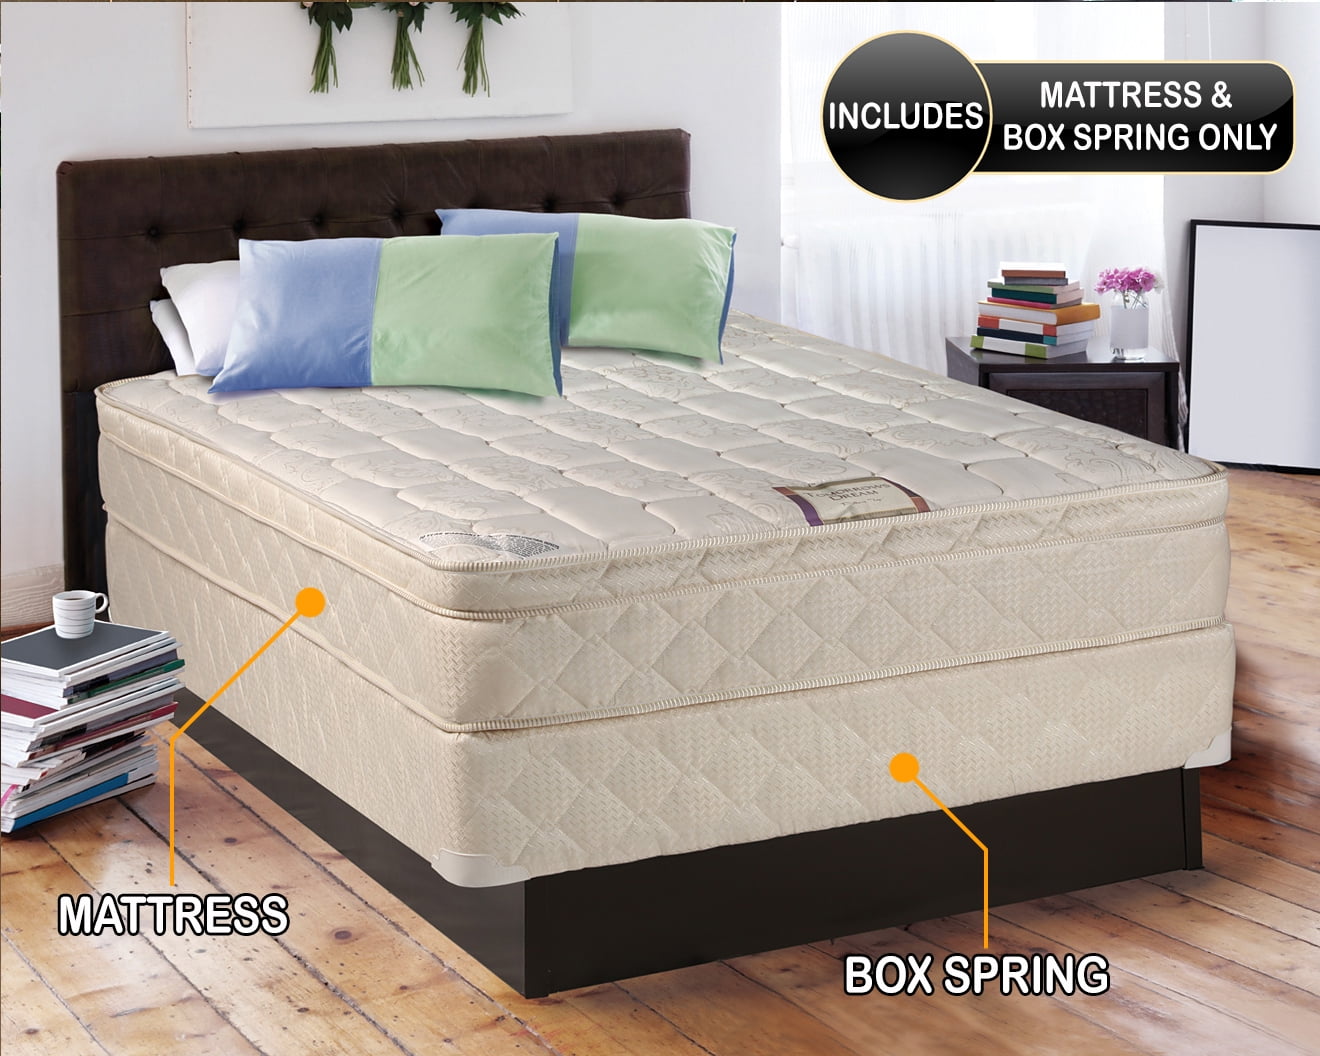 queen mattress and box spring set on sale